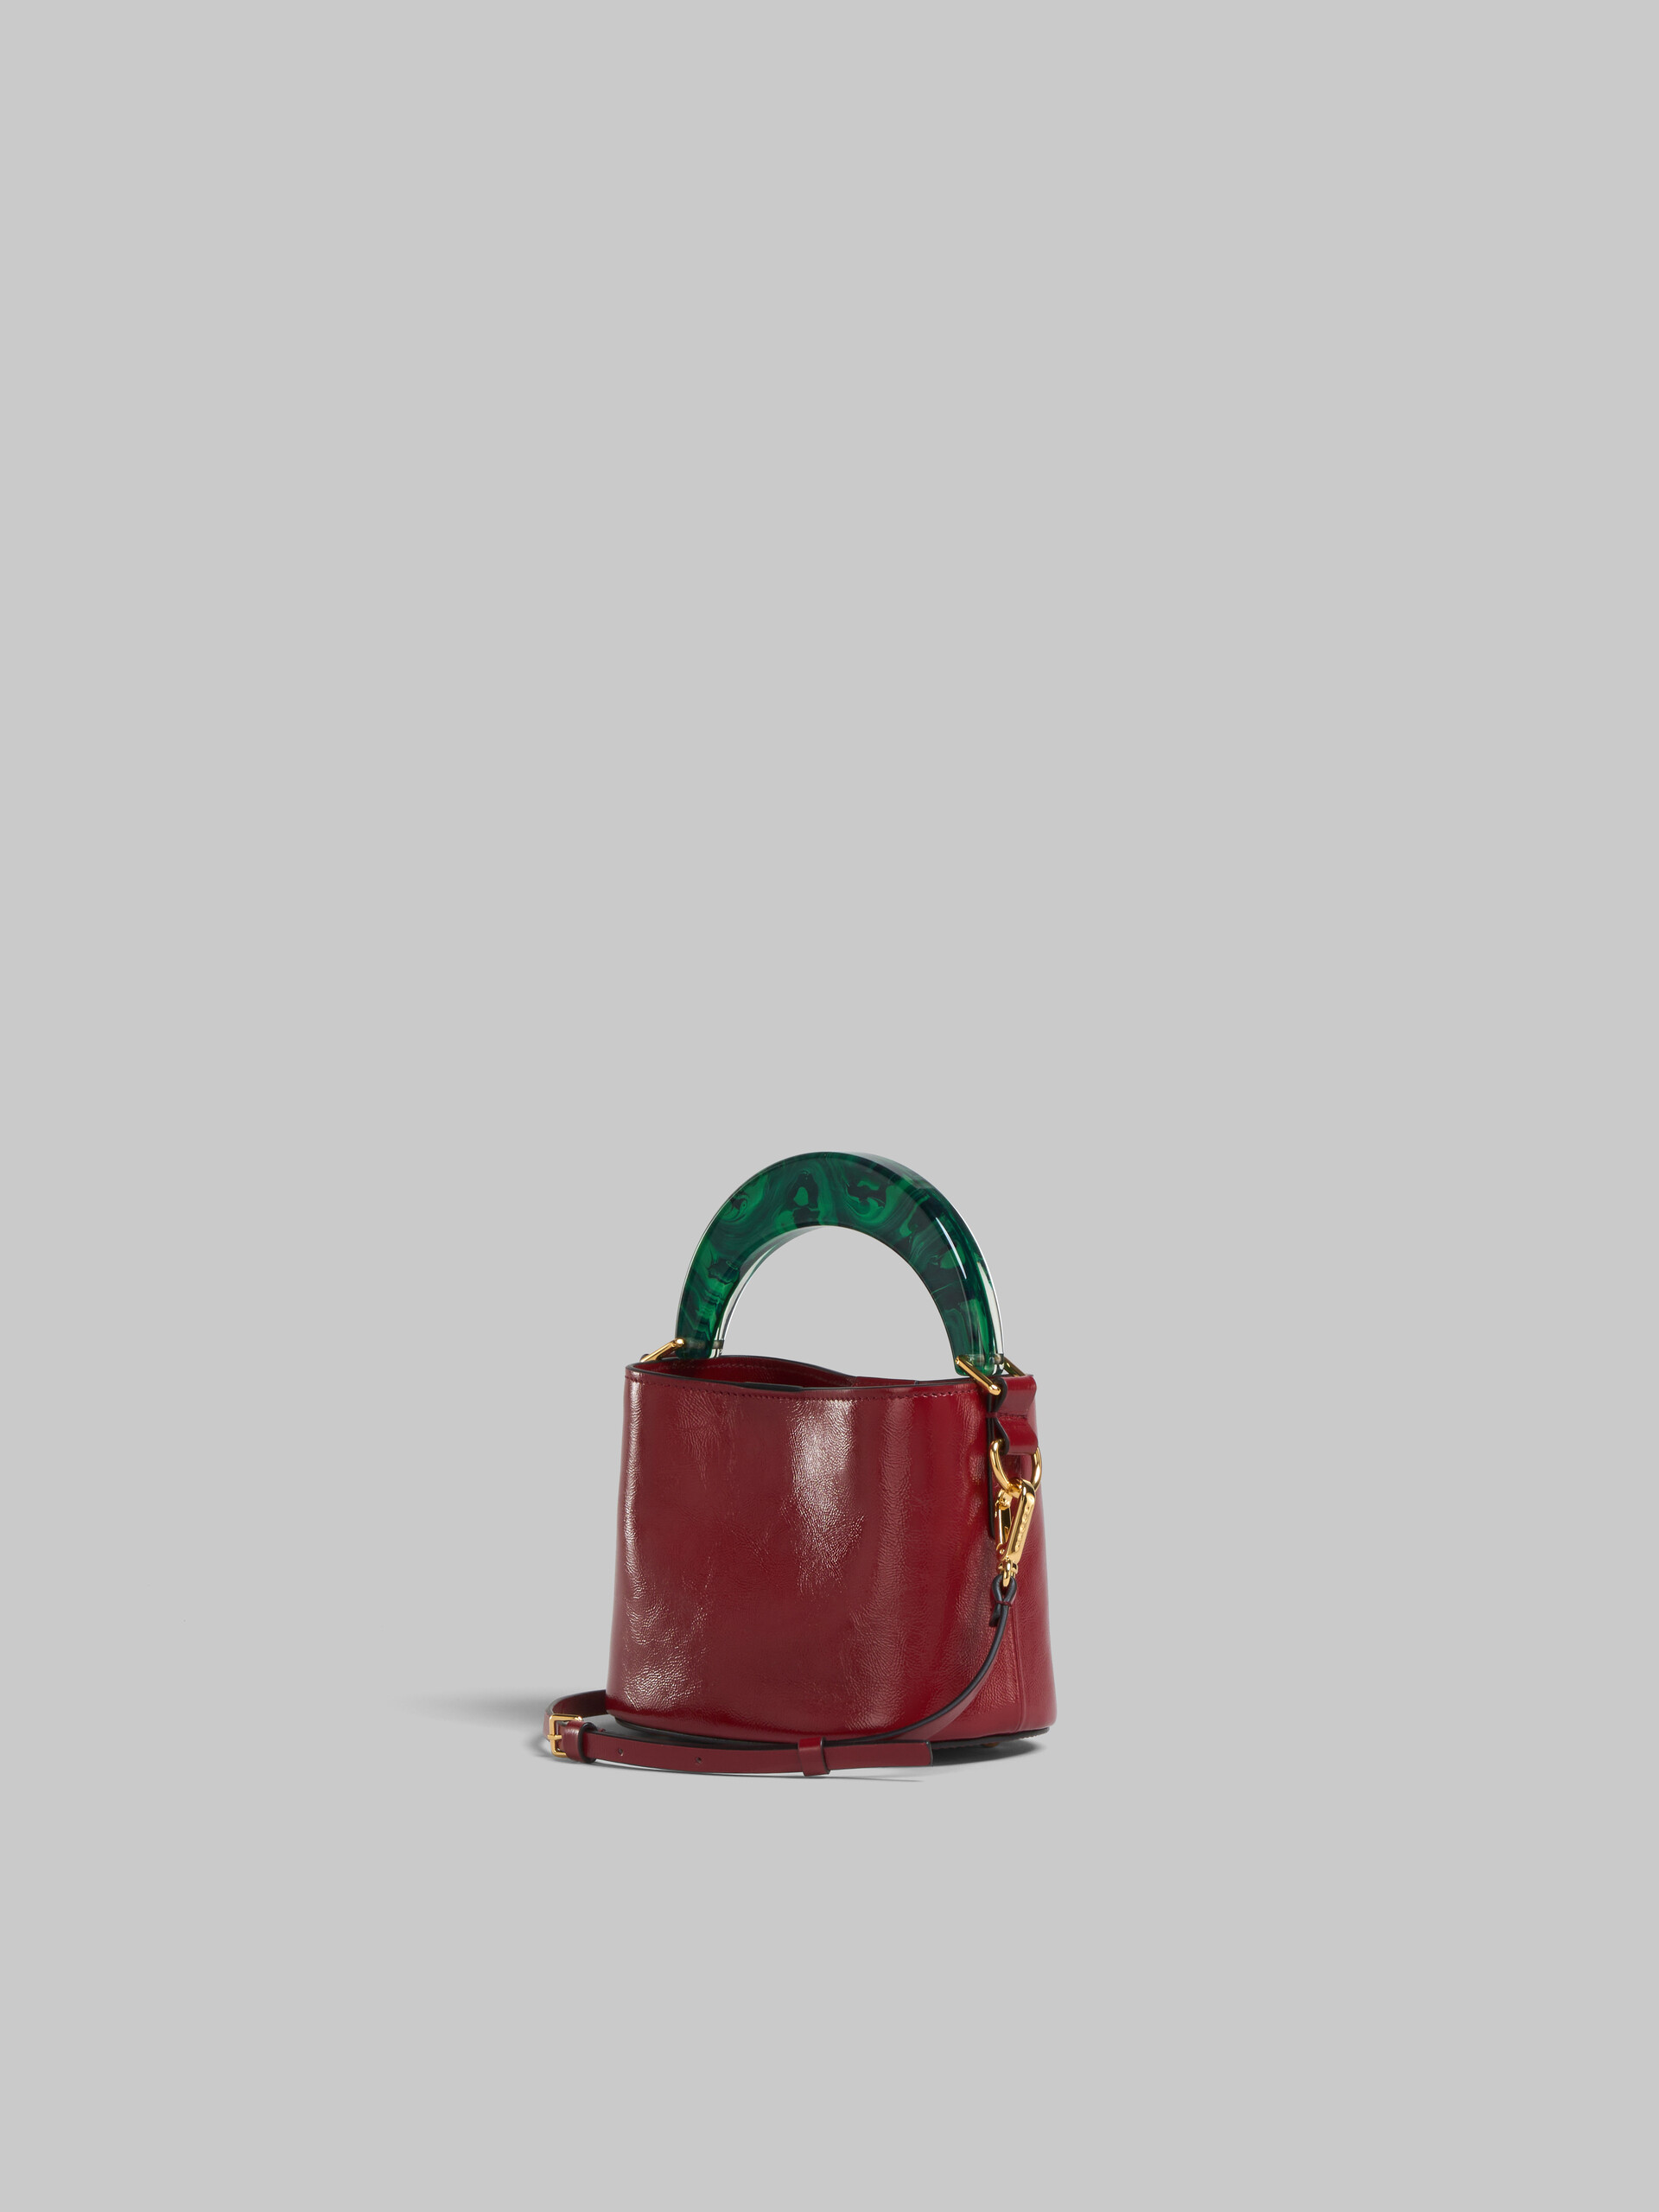 Venice Mini Bucket Bag in ruby red patent leather - Shoulder Bags - Image 2